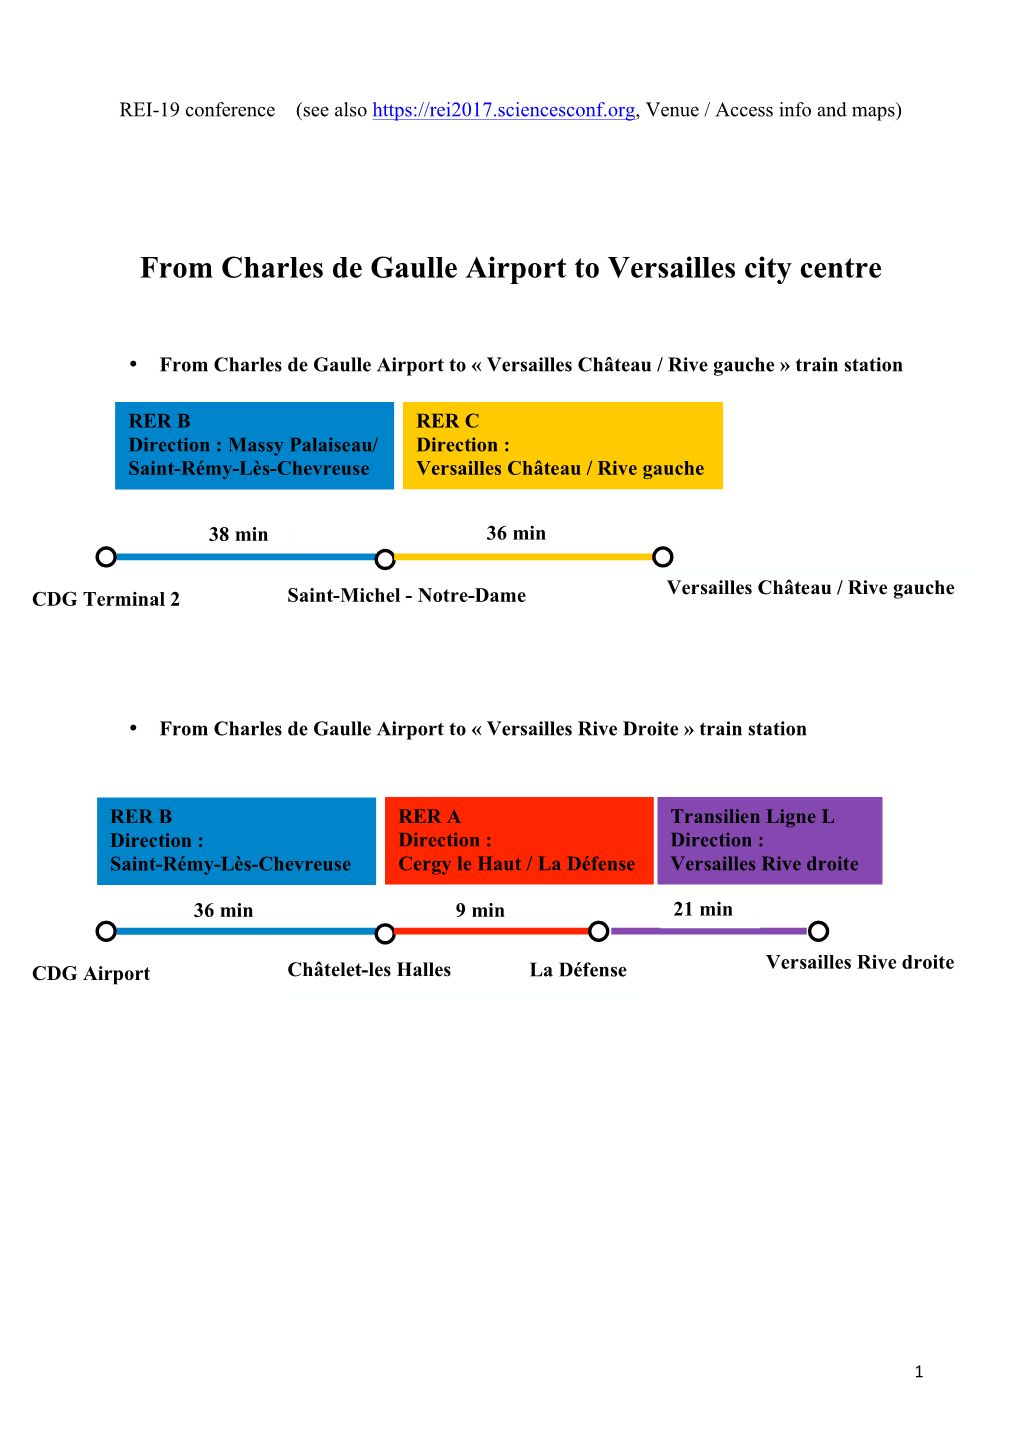 From Charles De Gaulle Airport to Versailles City Centre